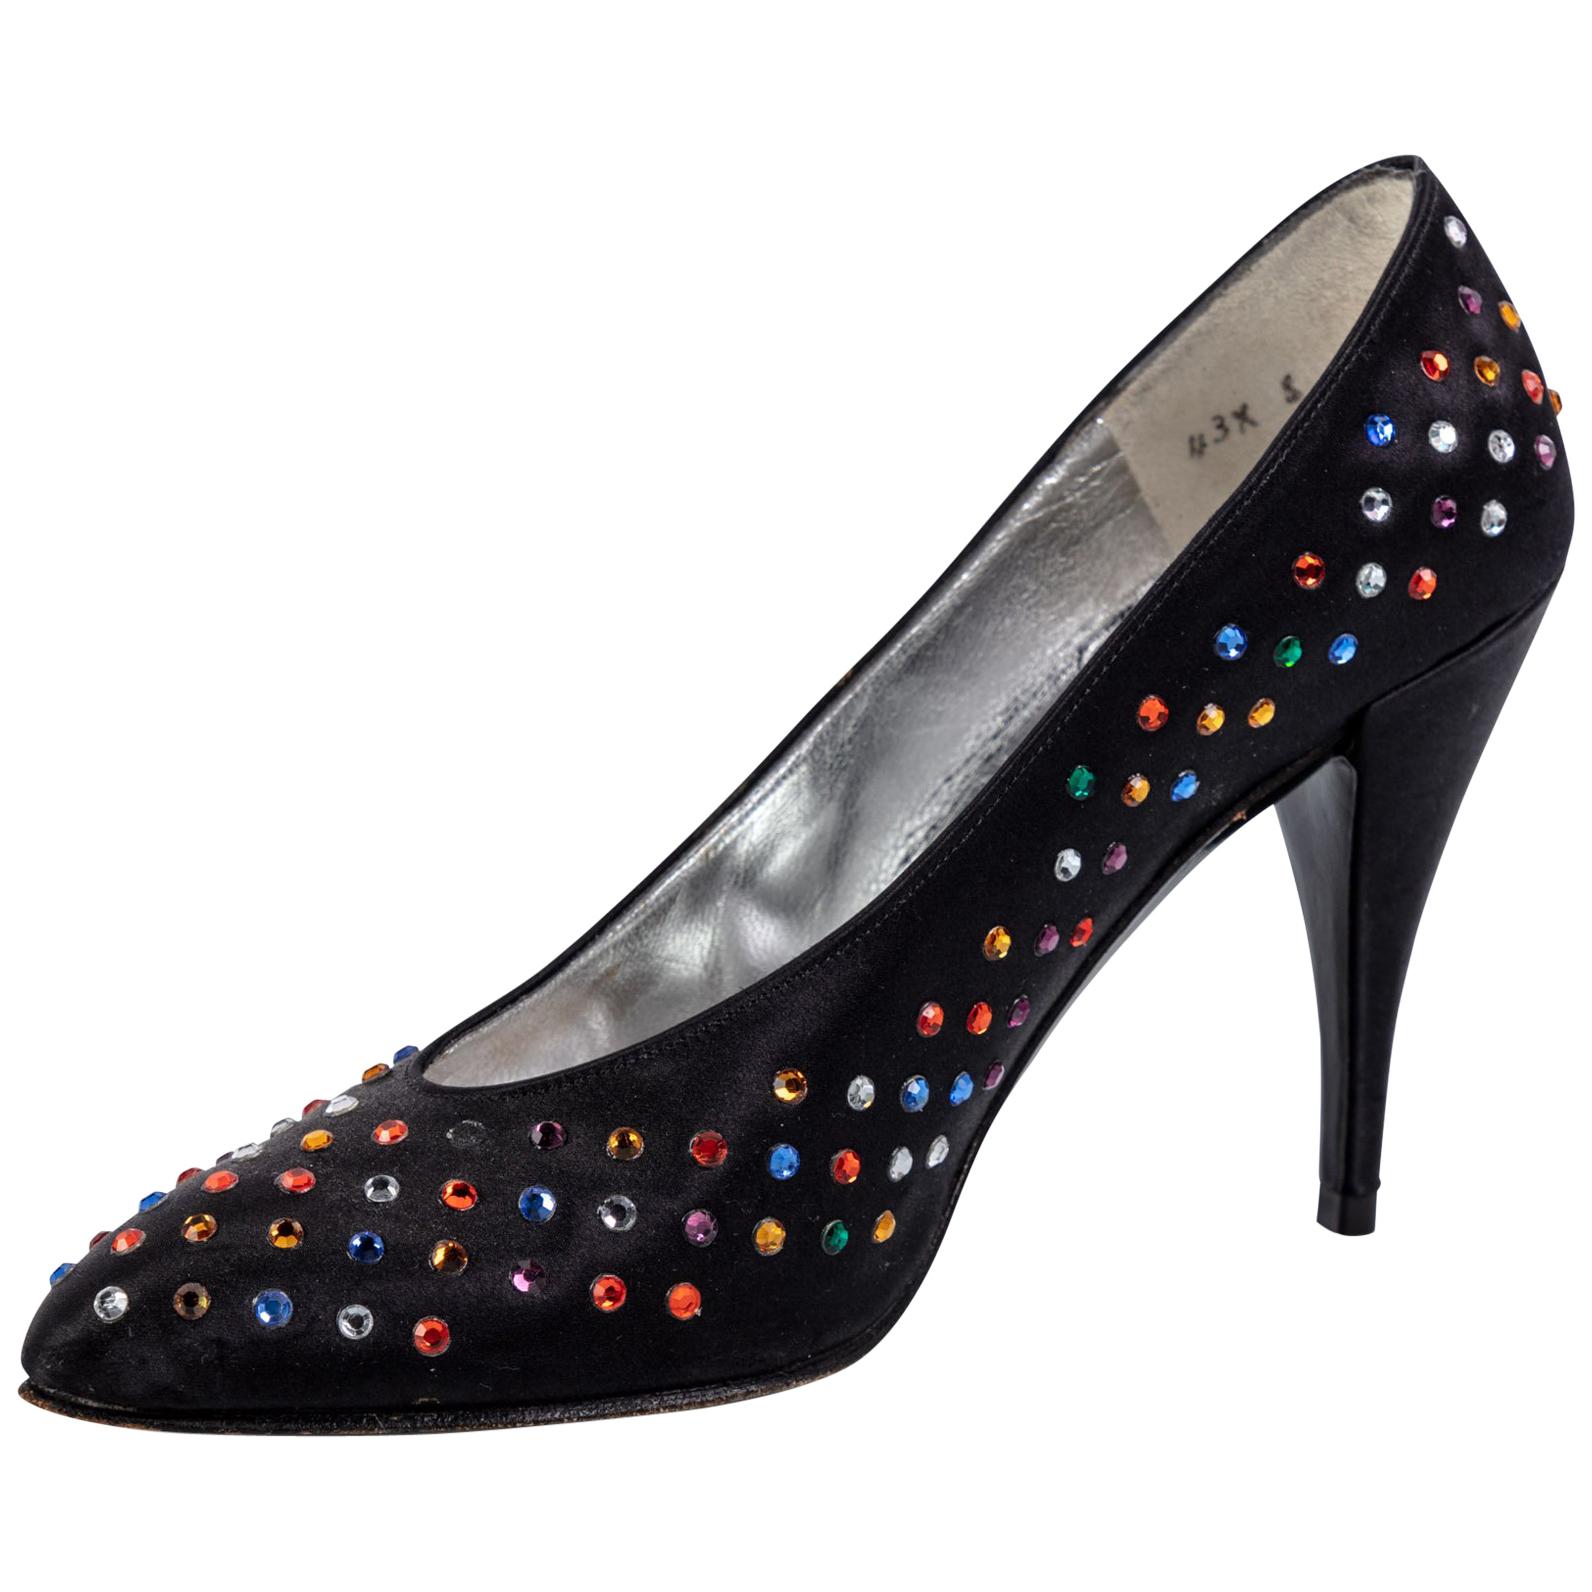 Vintage Charles Jourdan Paris black satin point toe high heel pumps. Leather soles.
Embellished with jewels in every color of the rainbow. Red, purple, yellow, ruby red, emerald green, blue, and diamond color.
Fits a size U.S 5 or a European 35
In